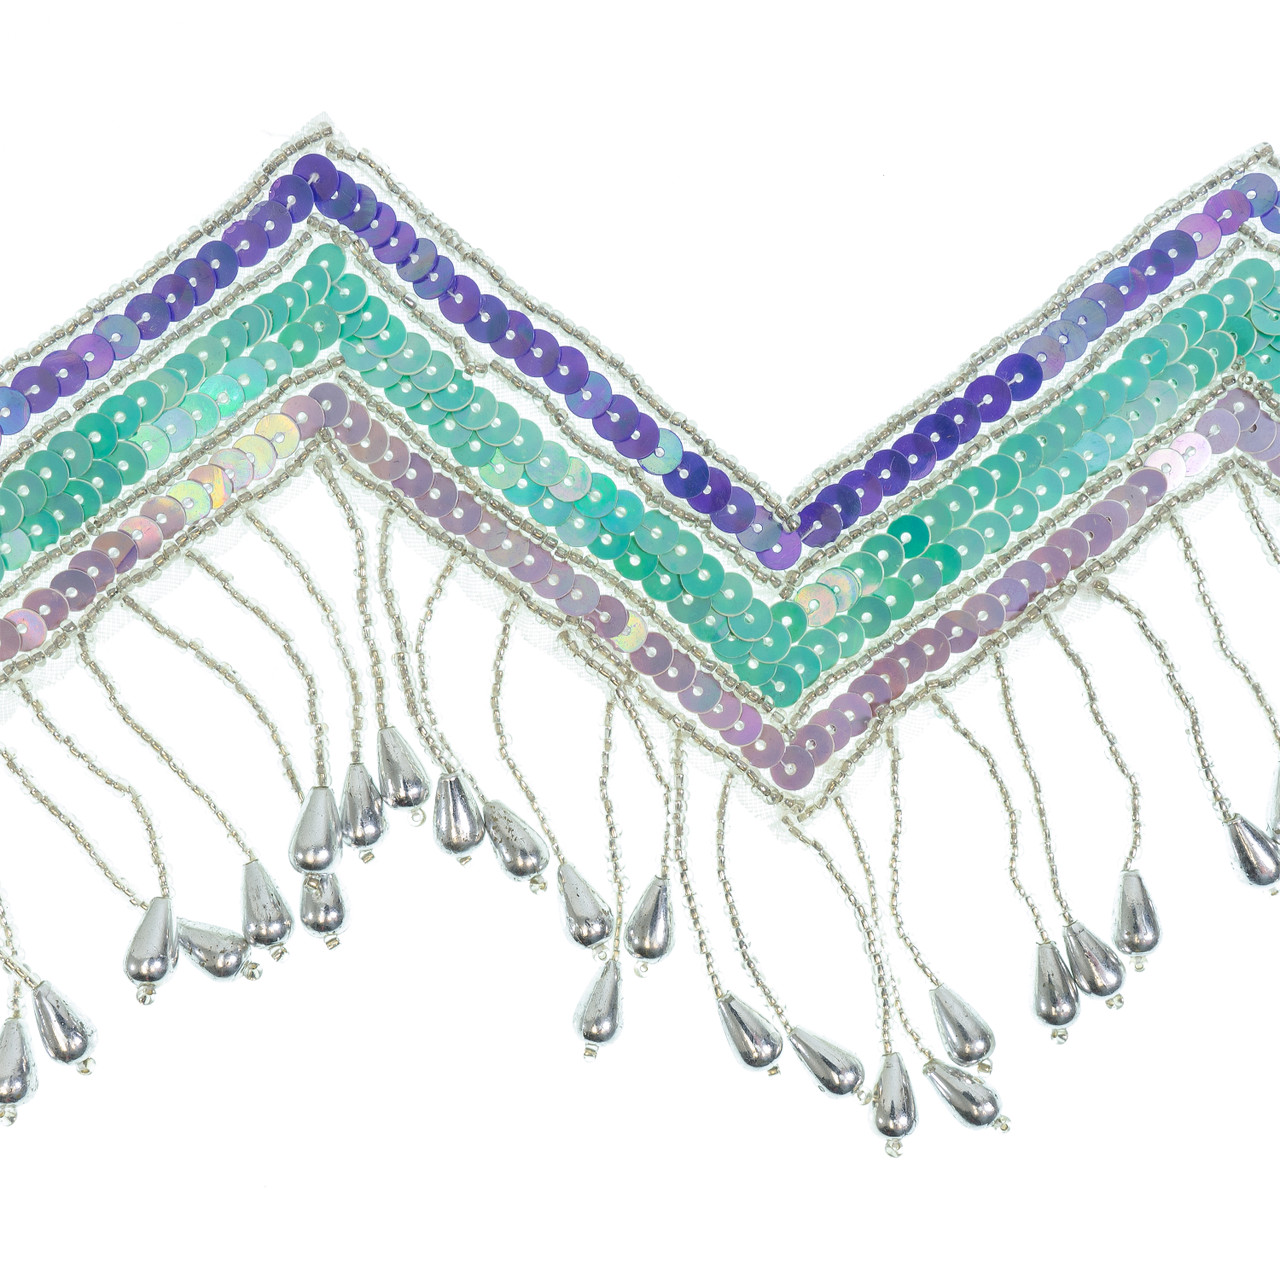 Designer Glass and Sequins Beaded Fringe as low as $10.85, buy Beaded Fringe  from our store at lowest prices guranteed .